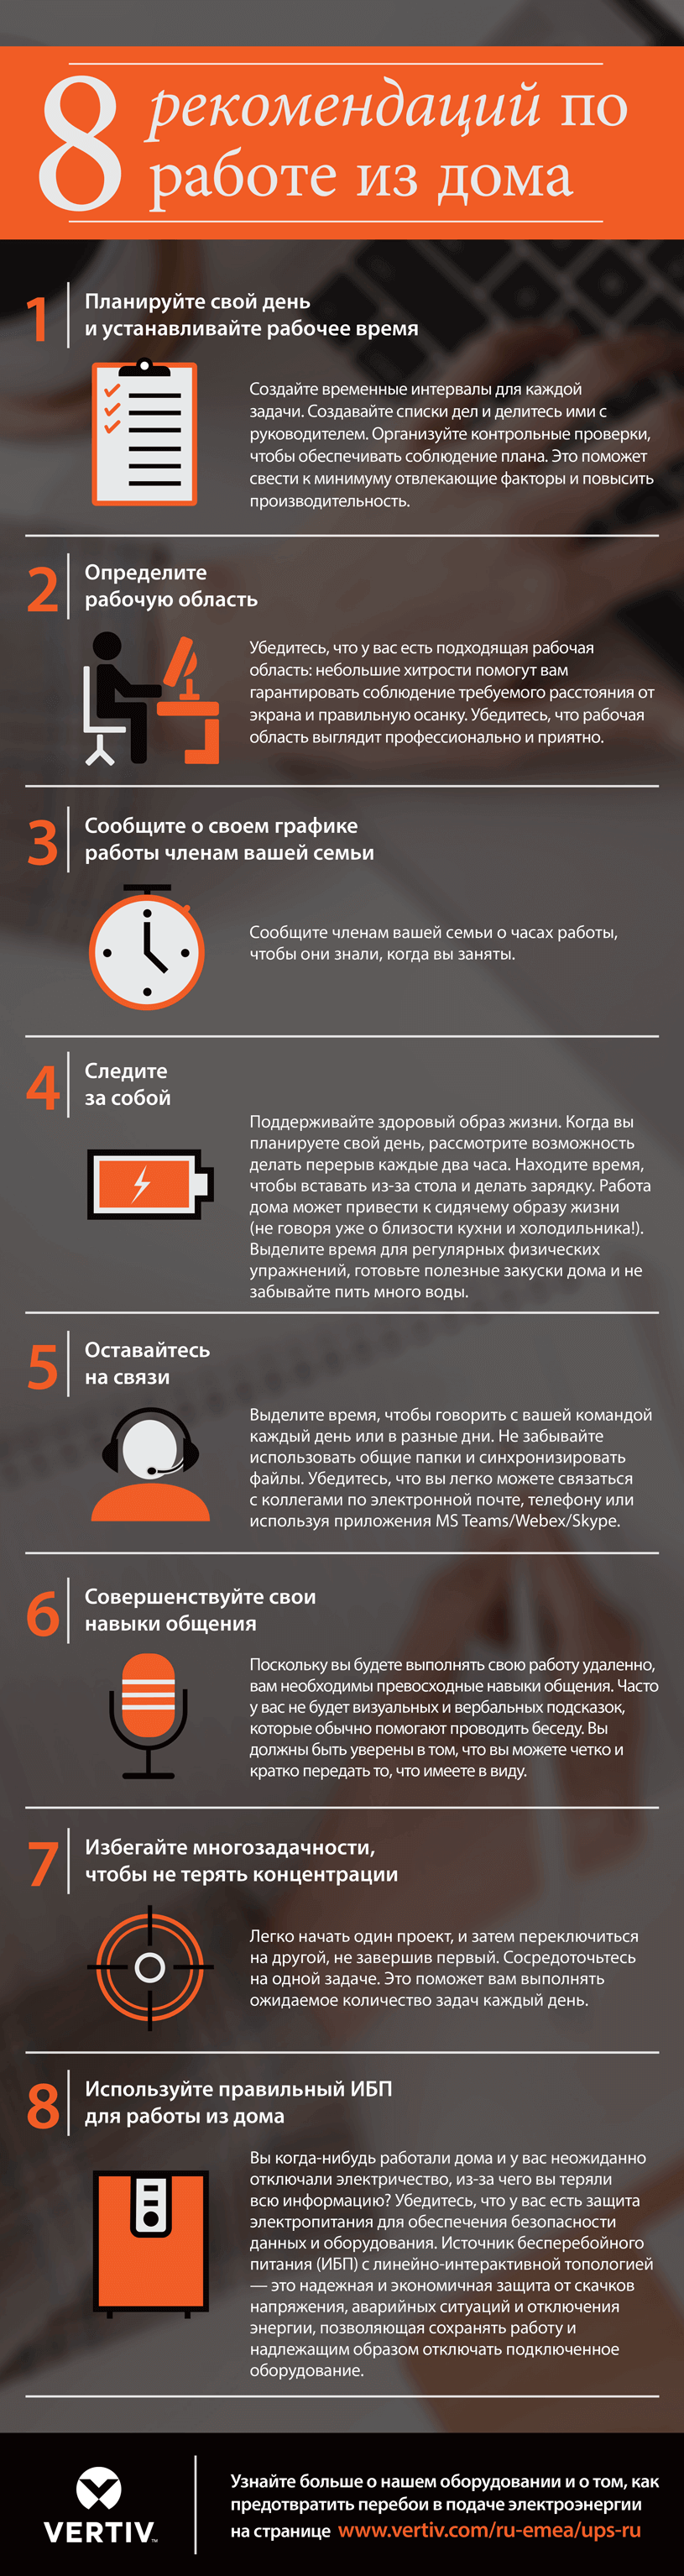 8-best-practices-to-wfh-infographics-image-ig-ru-emea_305942_305942_1.png